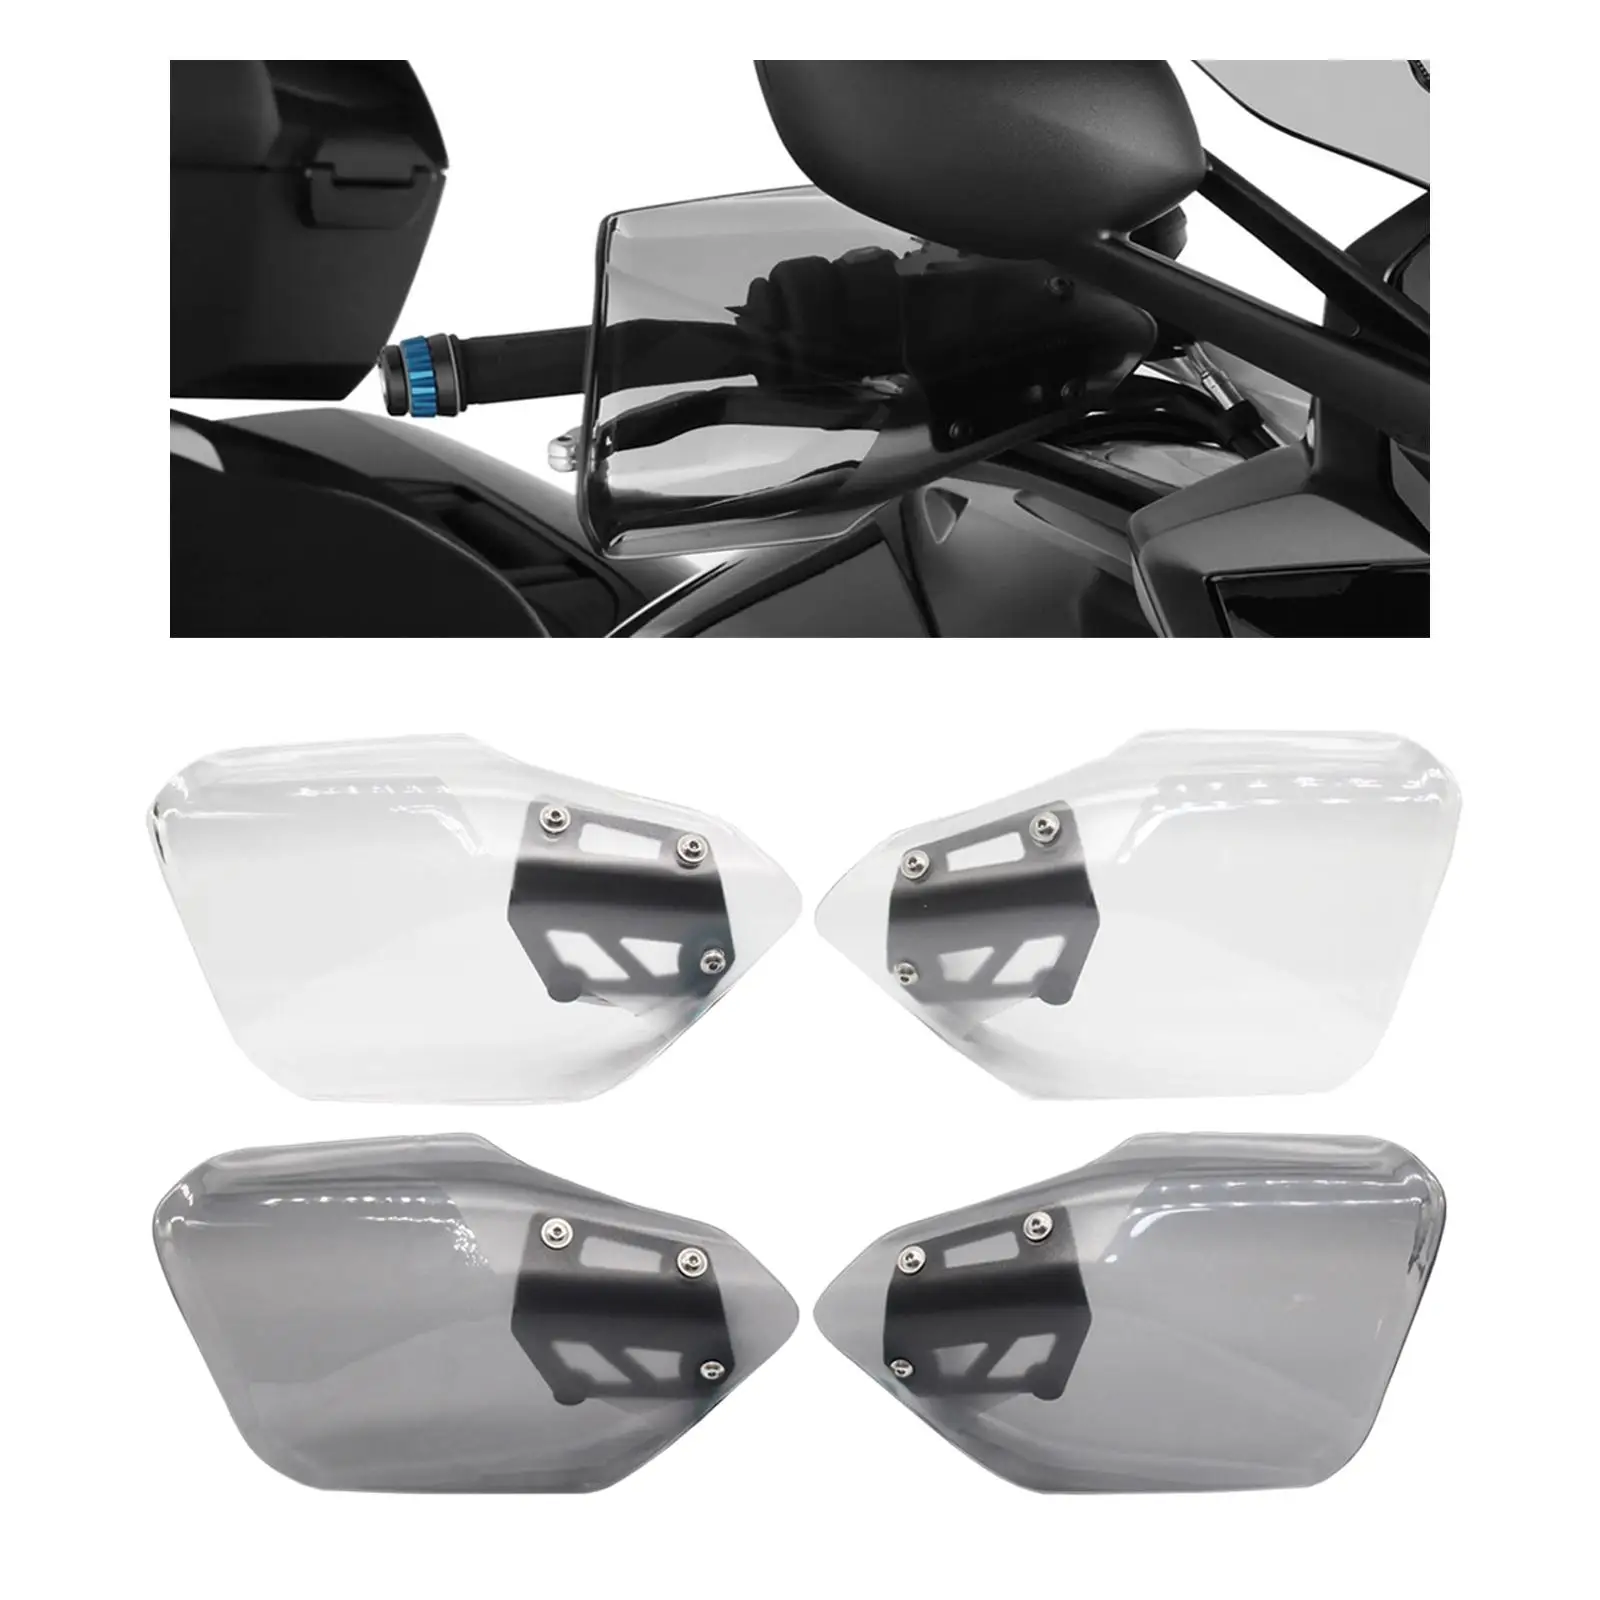 2x Motorcycle Hand Guard Hand Guard Shield, Deflectors, Protective , Handlebar  for BMW K 1600 Gtl Accessories Replace